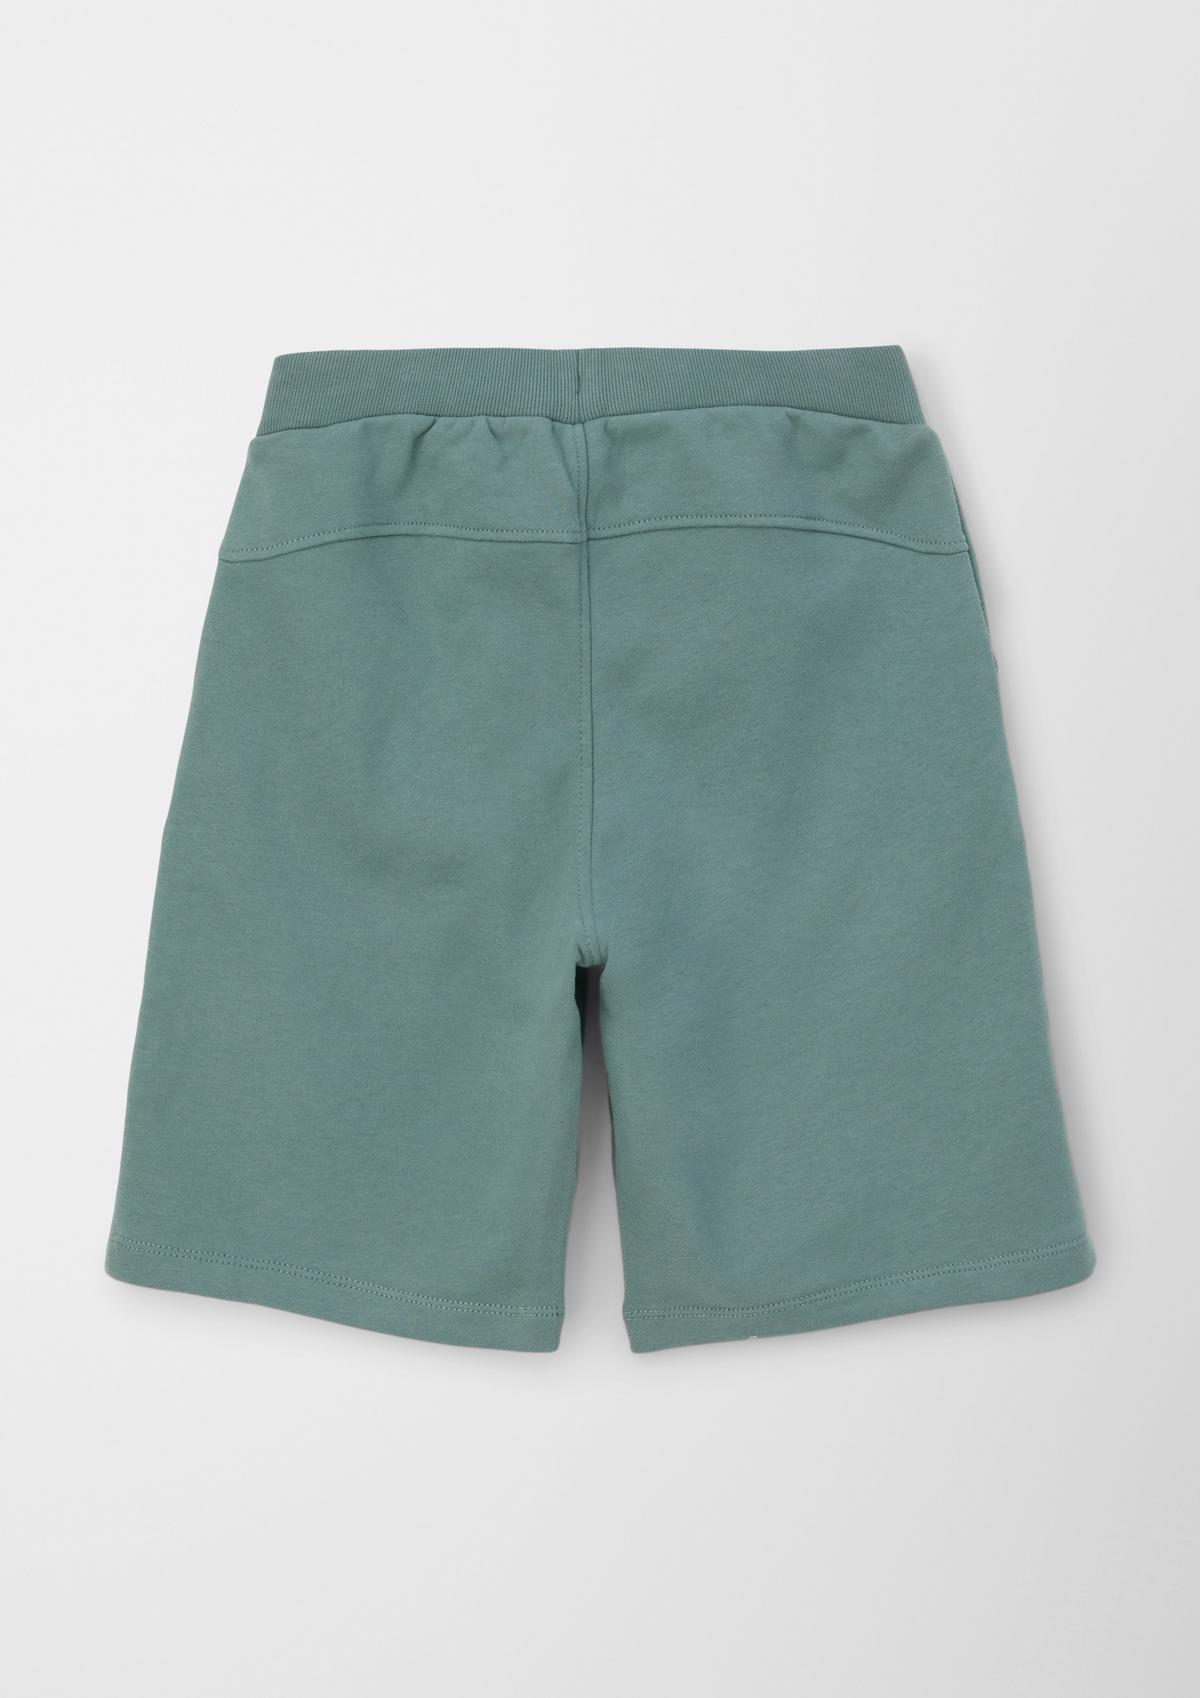 s.Oliver Relaxed: Softe Sweatshorts